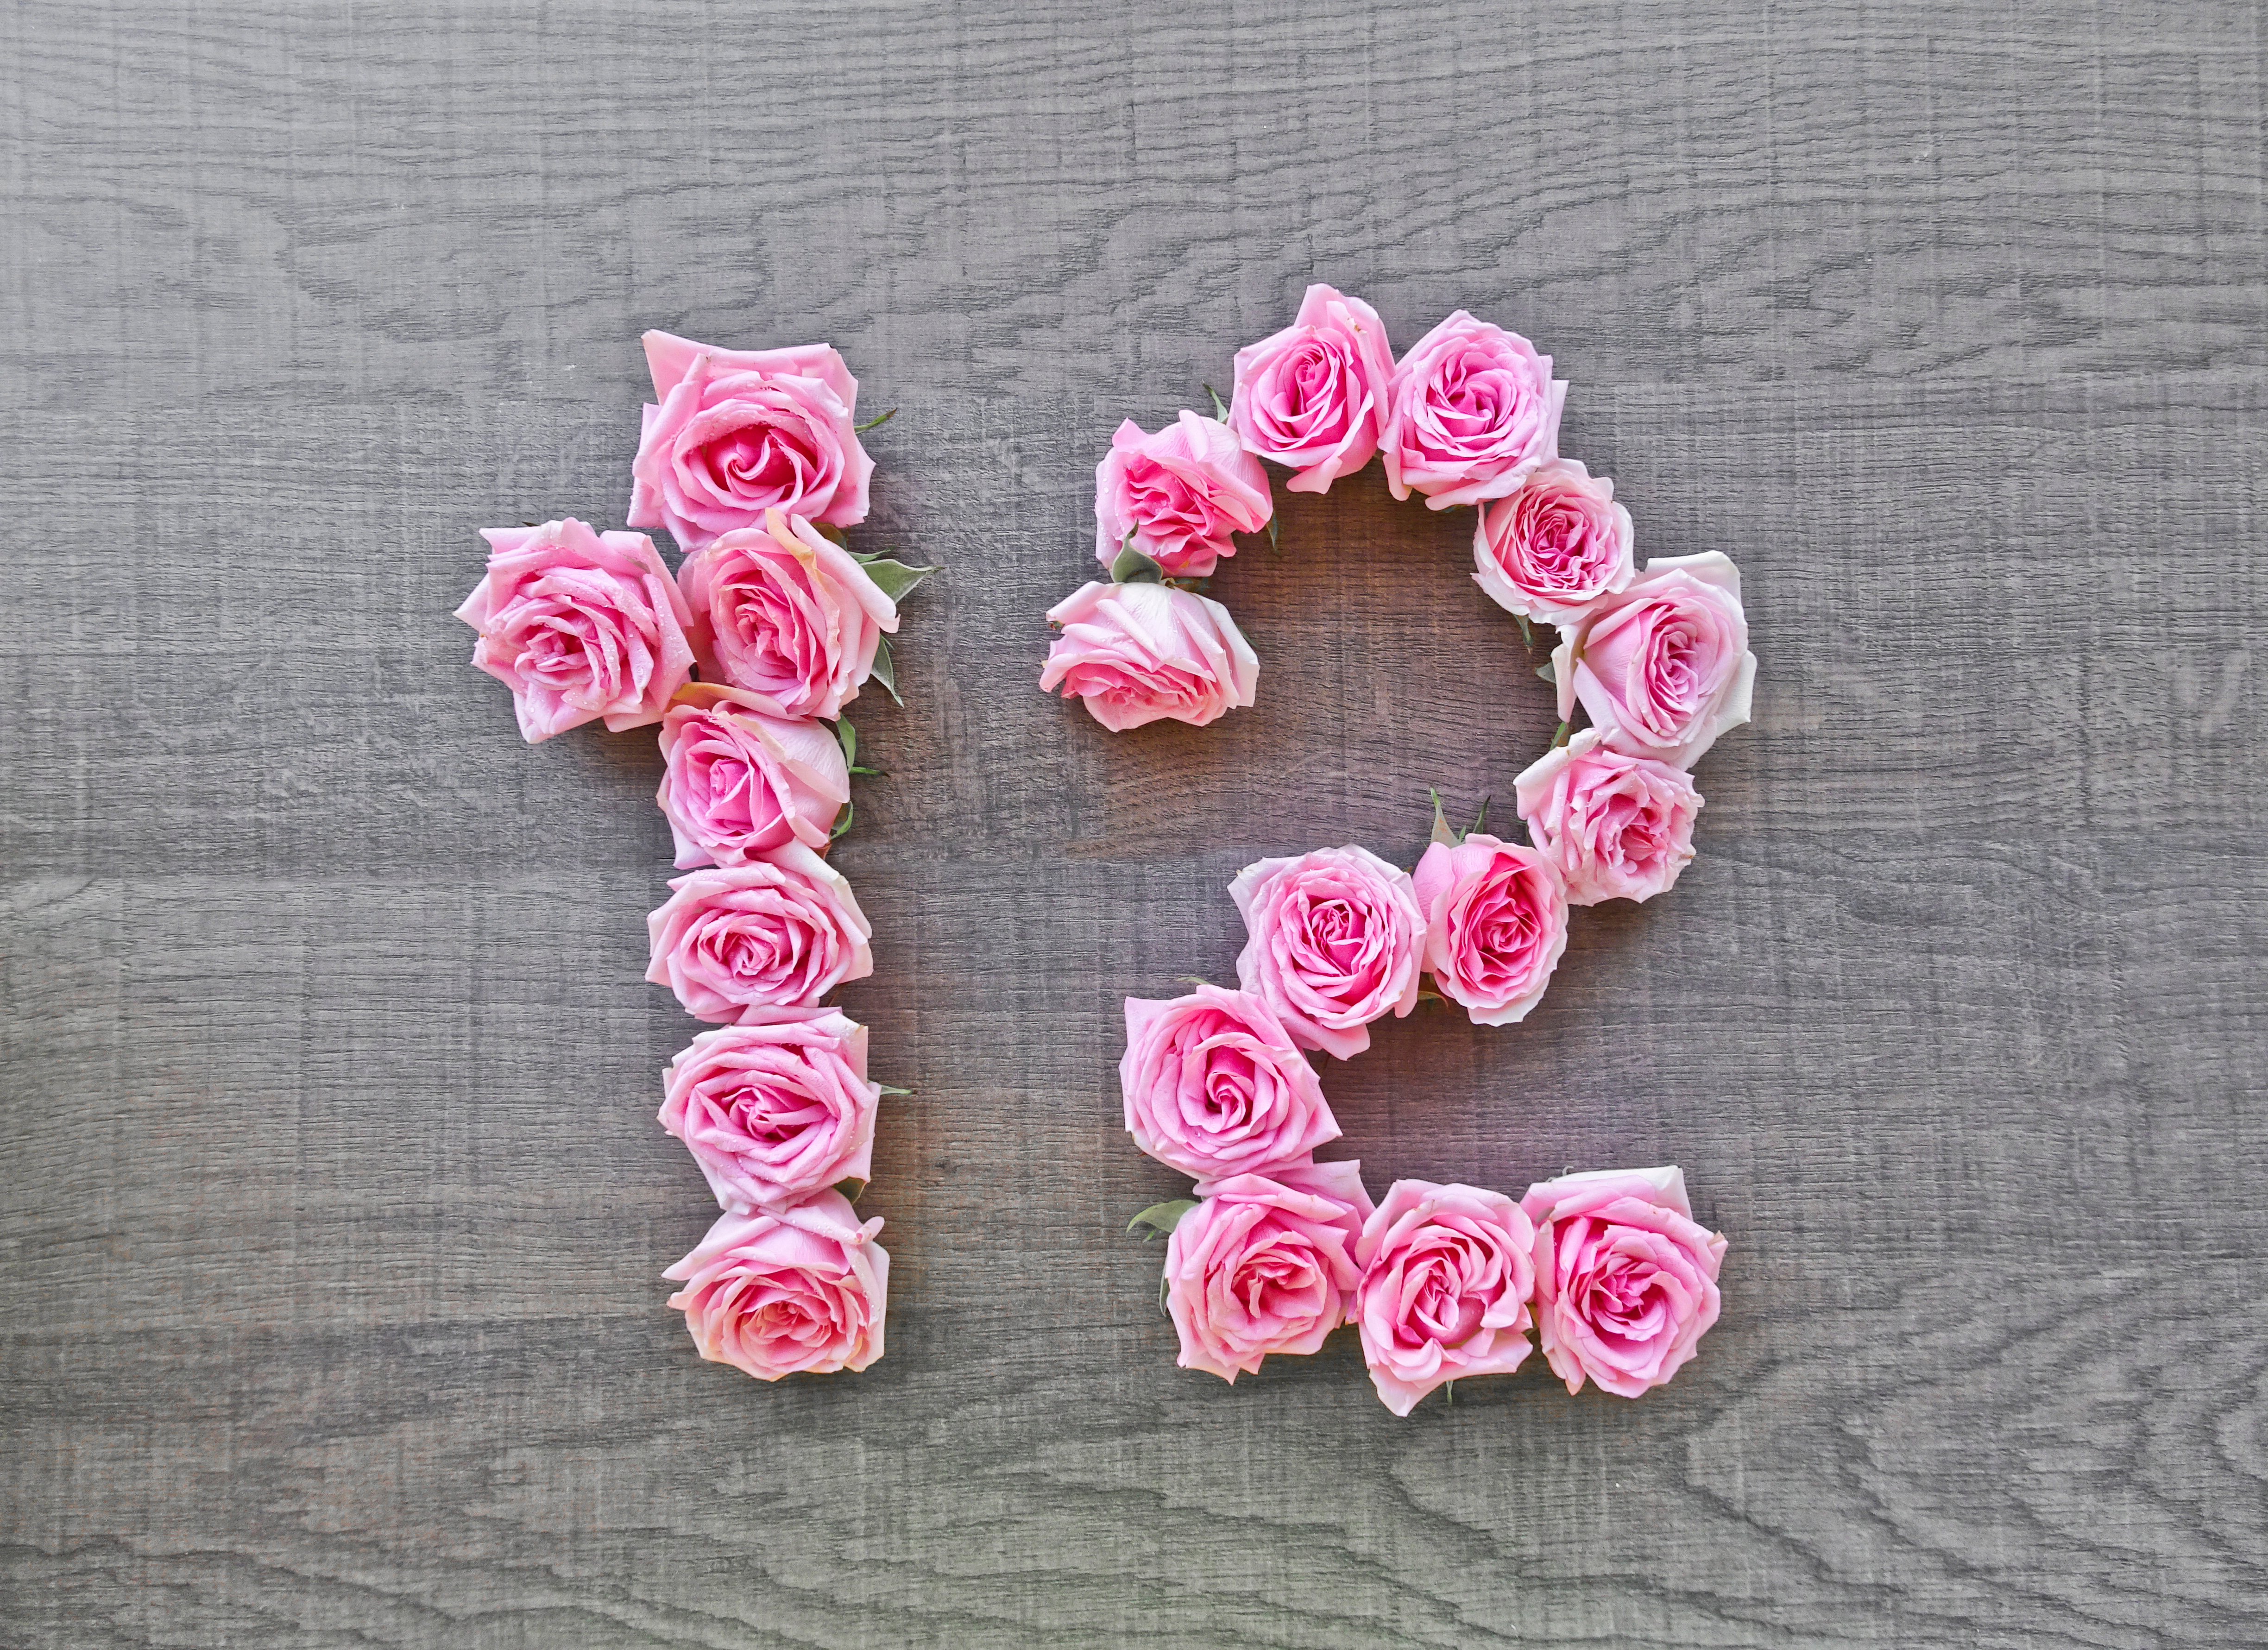 The number 12 written in pink flowers